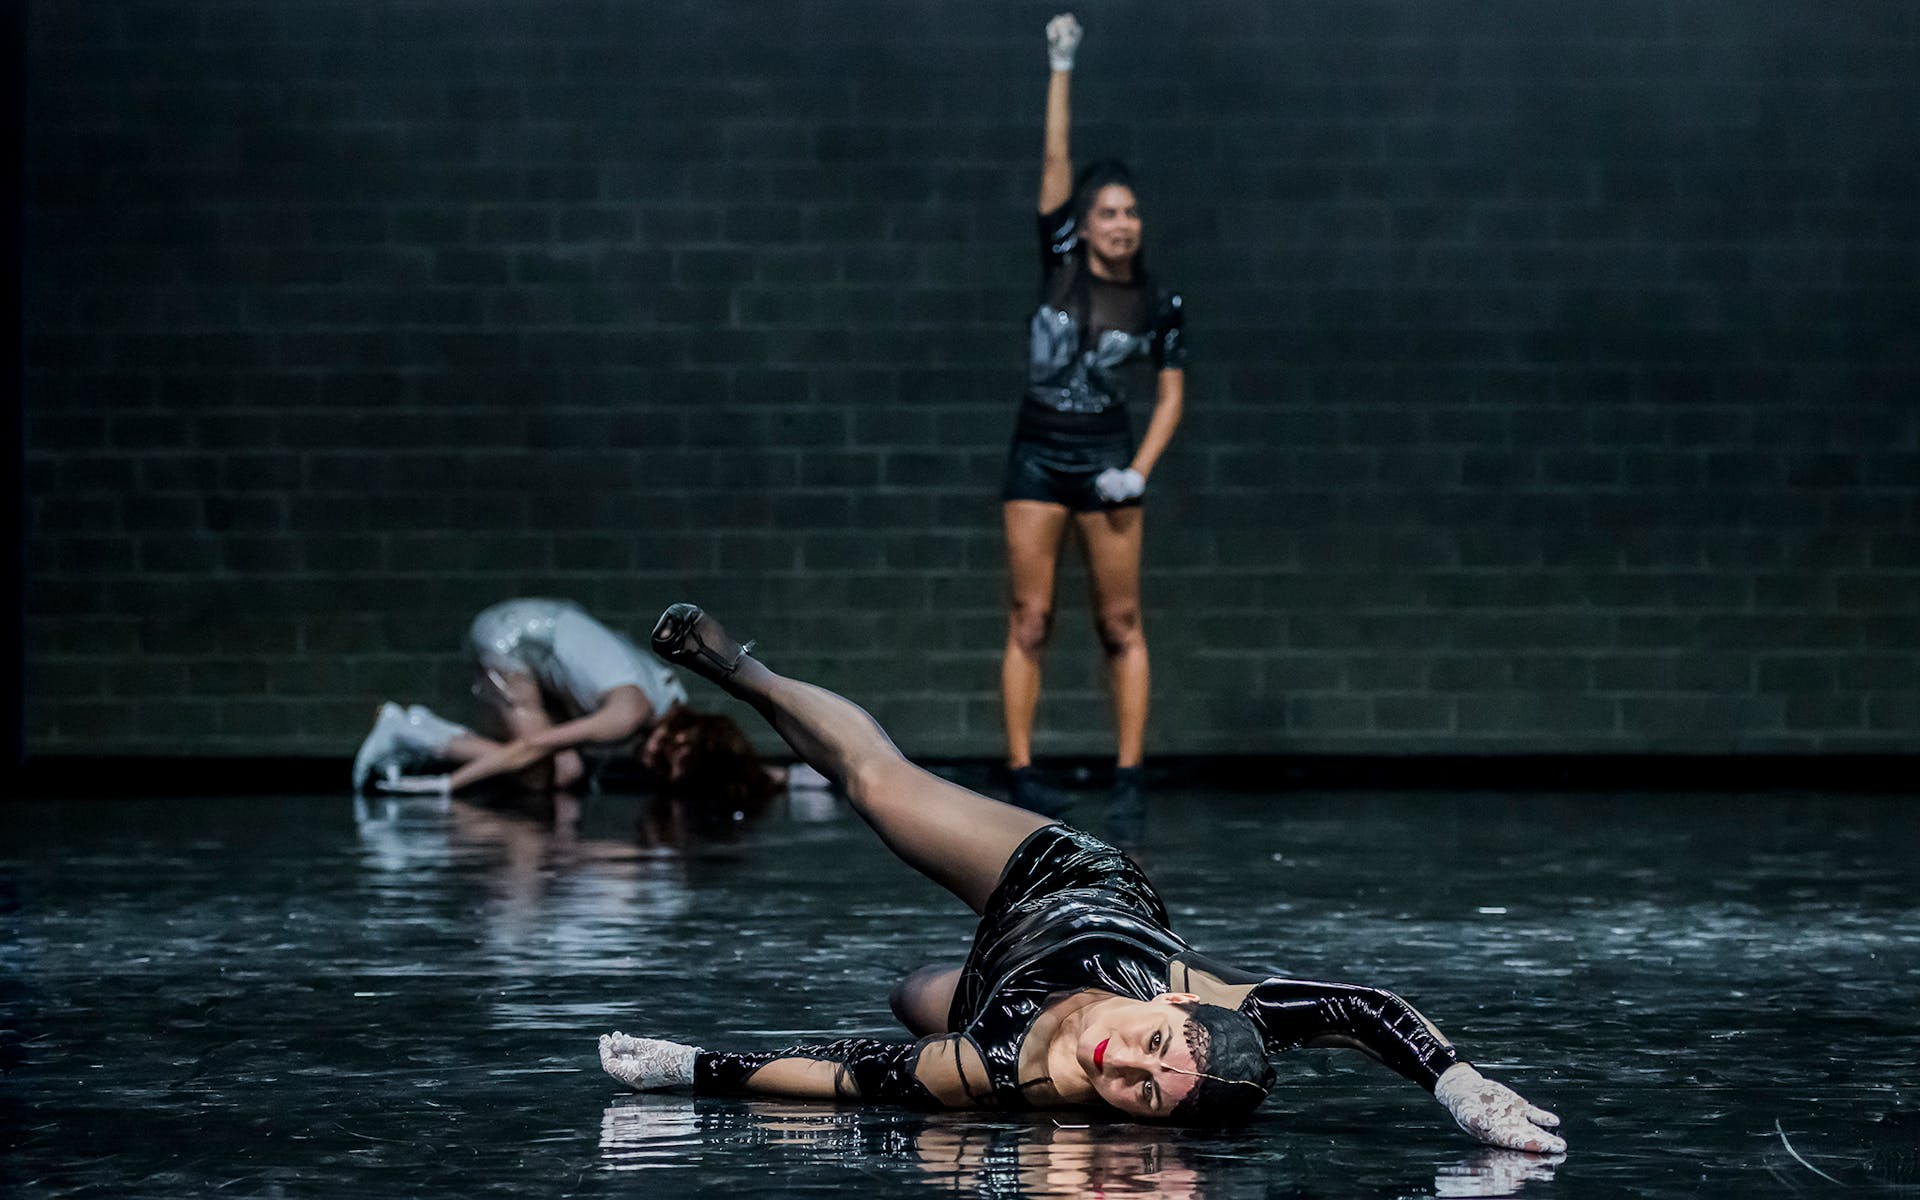 Two dancers on the ground, one standing with arm raised, on a black stage with brick wall background.